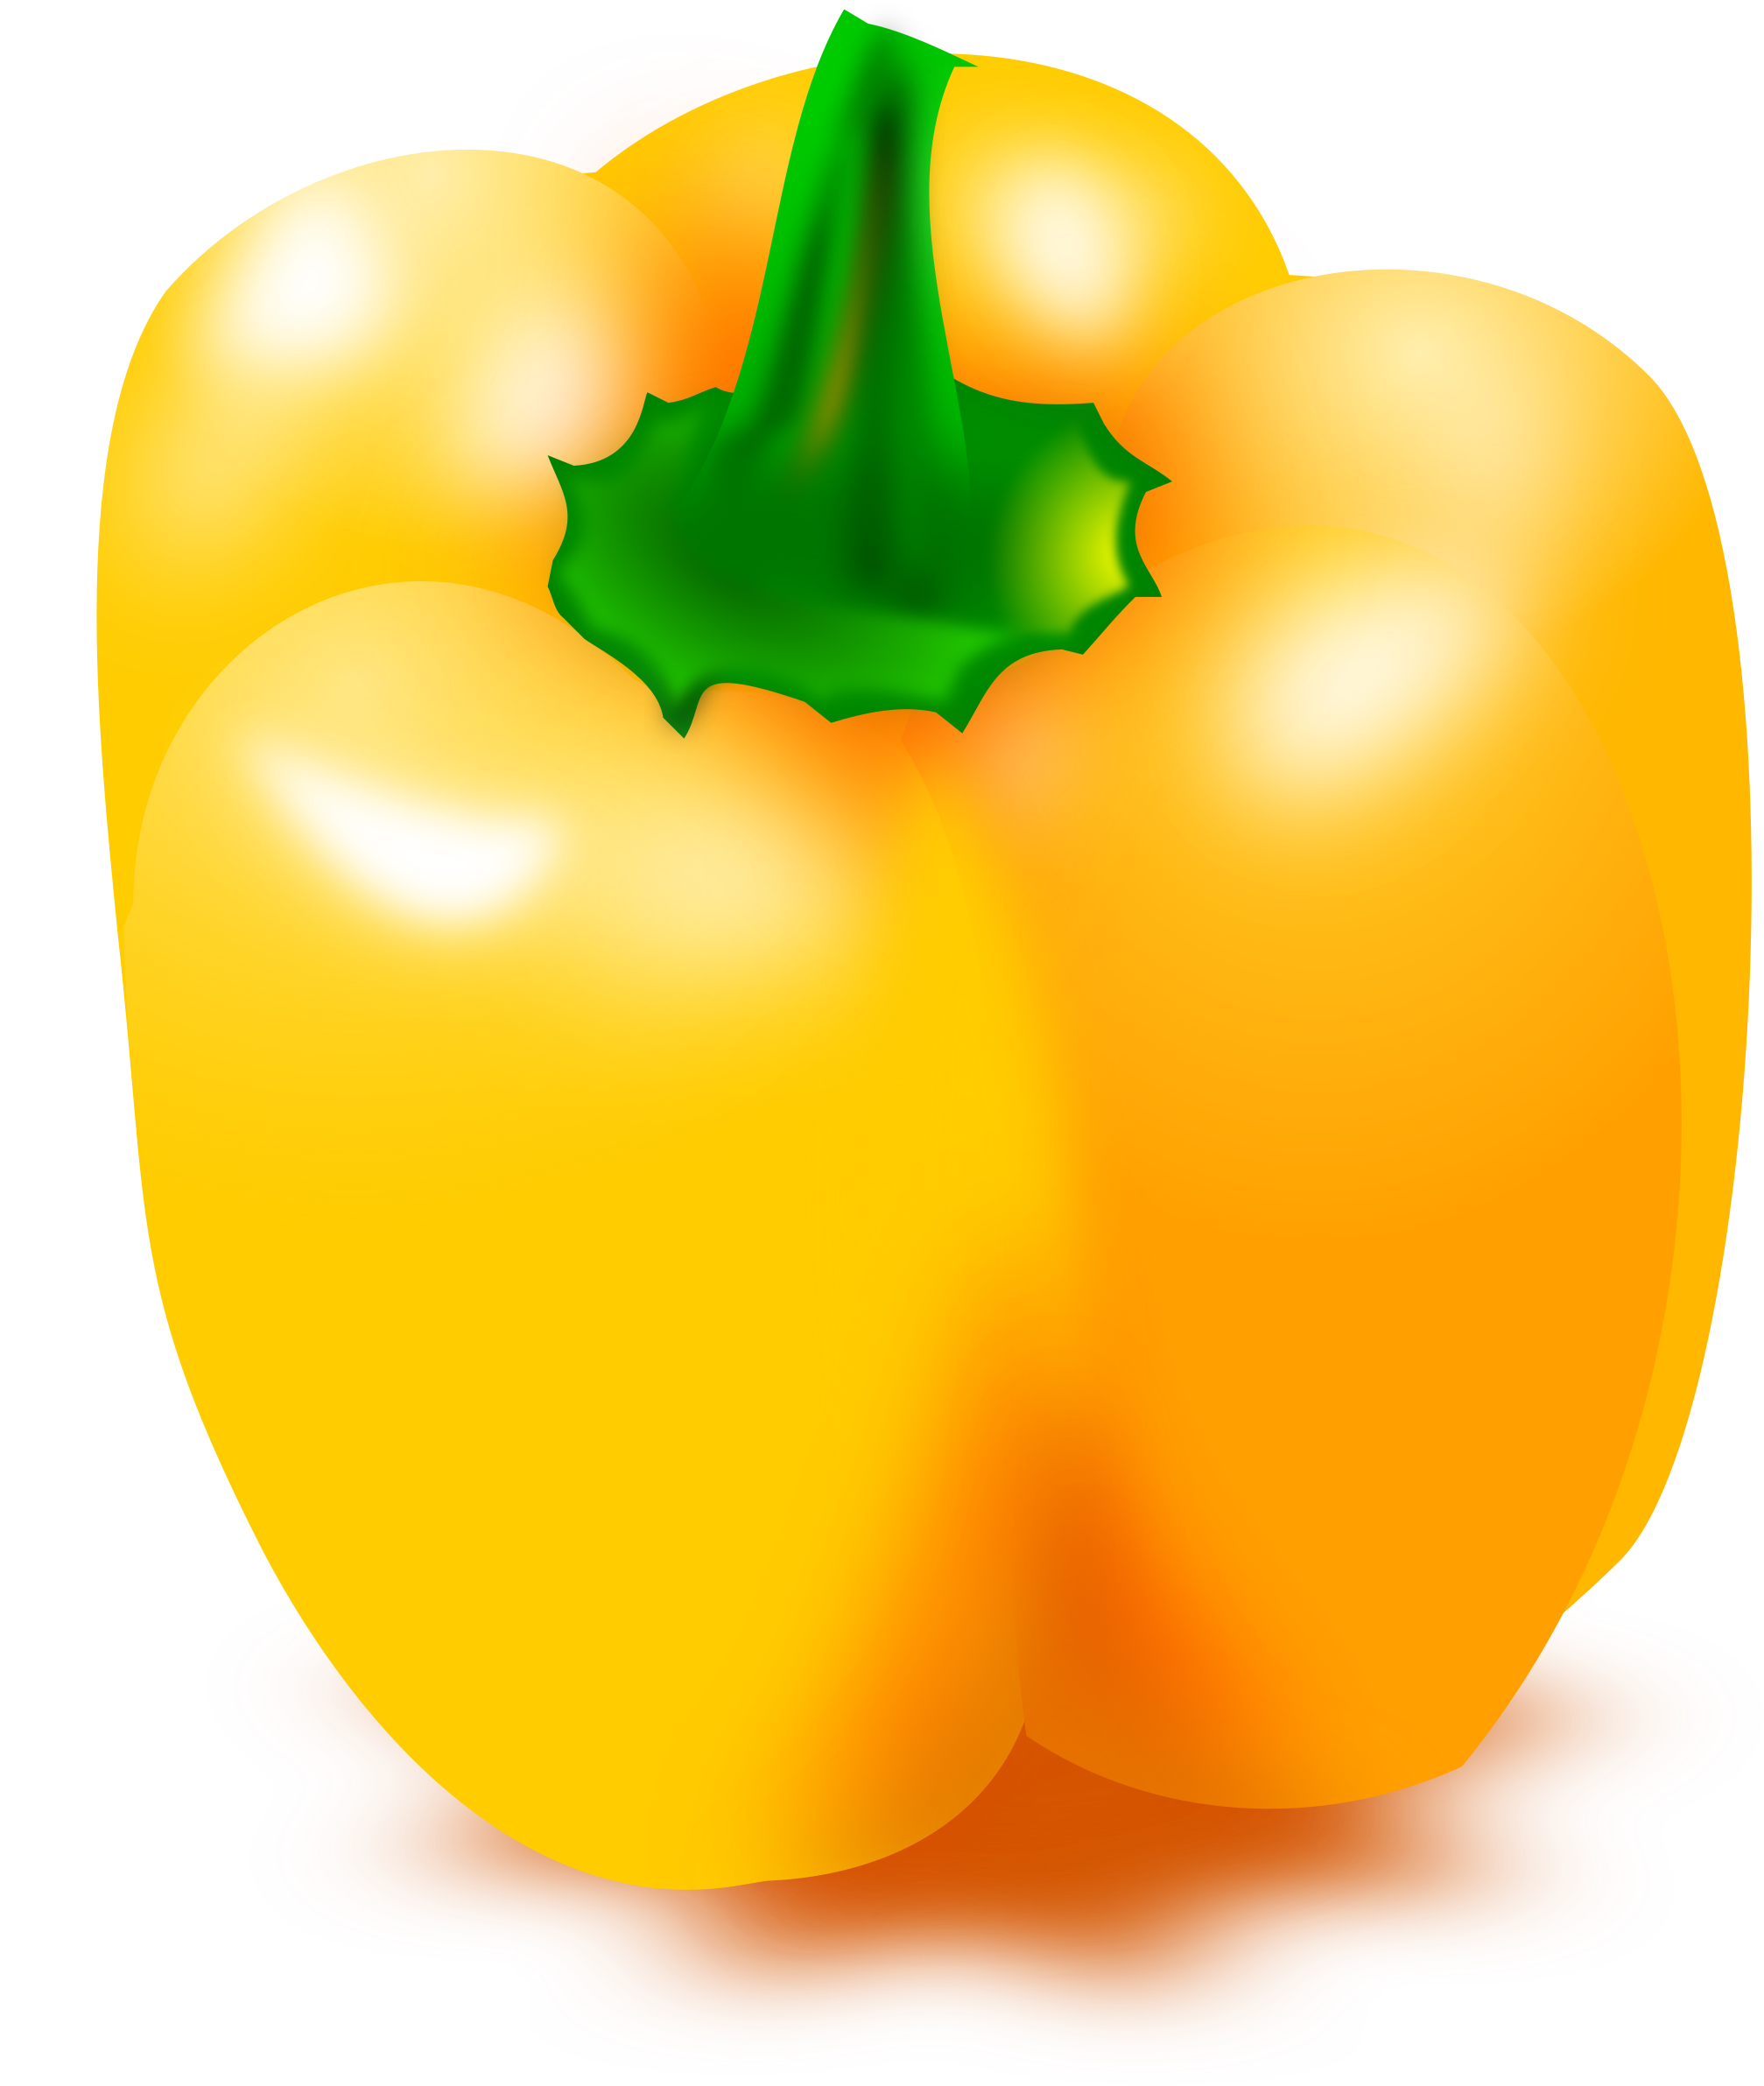 Paprika Pepper Vegetables Vitamins Healthy Orange - Yellow Bell Pepper Clipart (641x750)